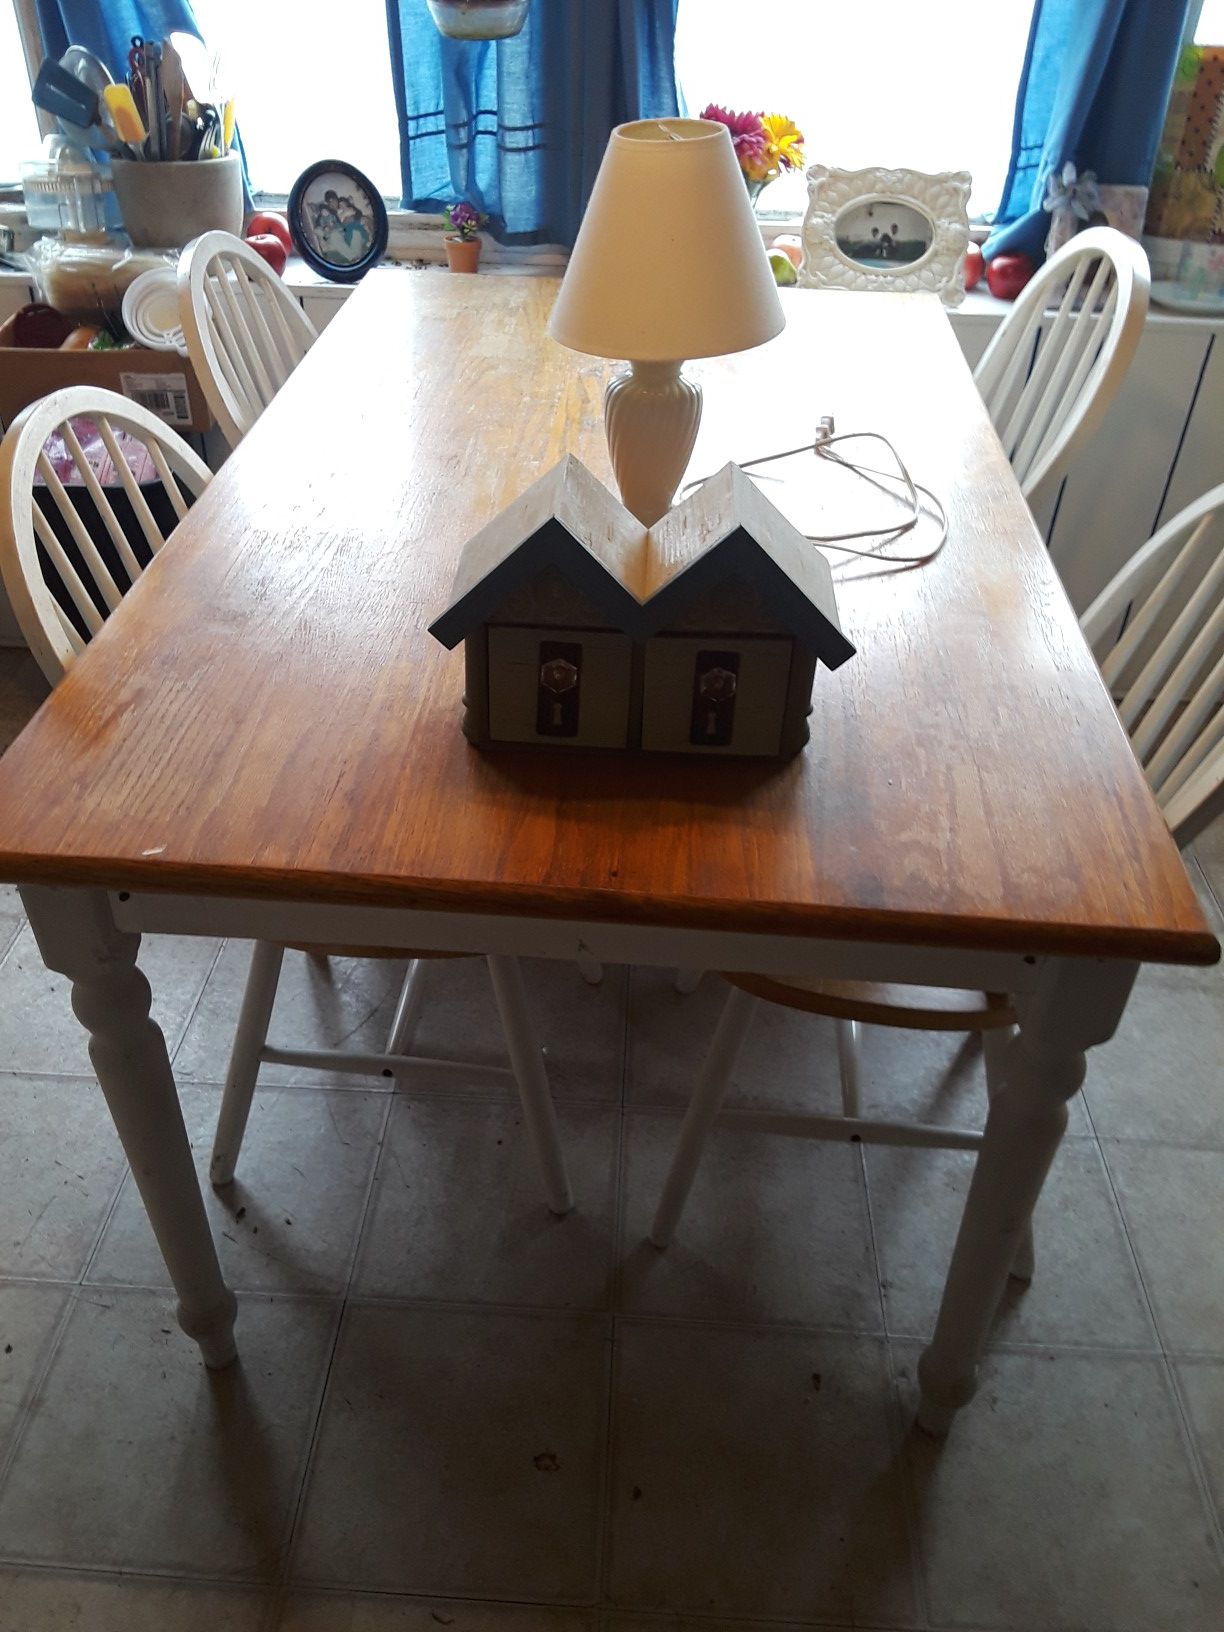 Pending pick up ×5feet kitchen table with with four chairs and small lamp and with small little tree house for free